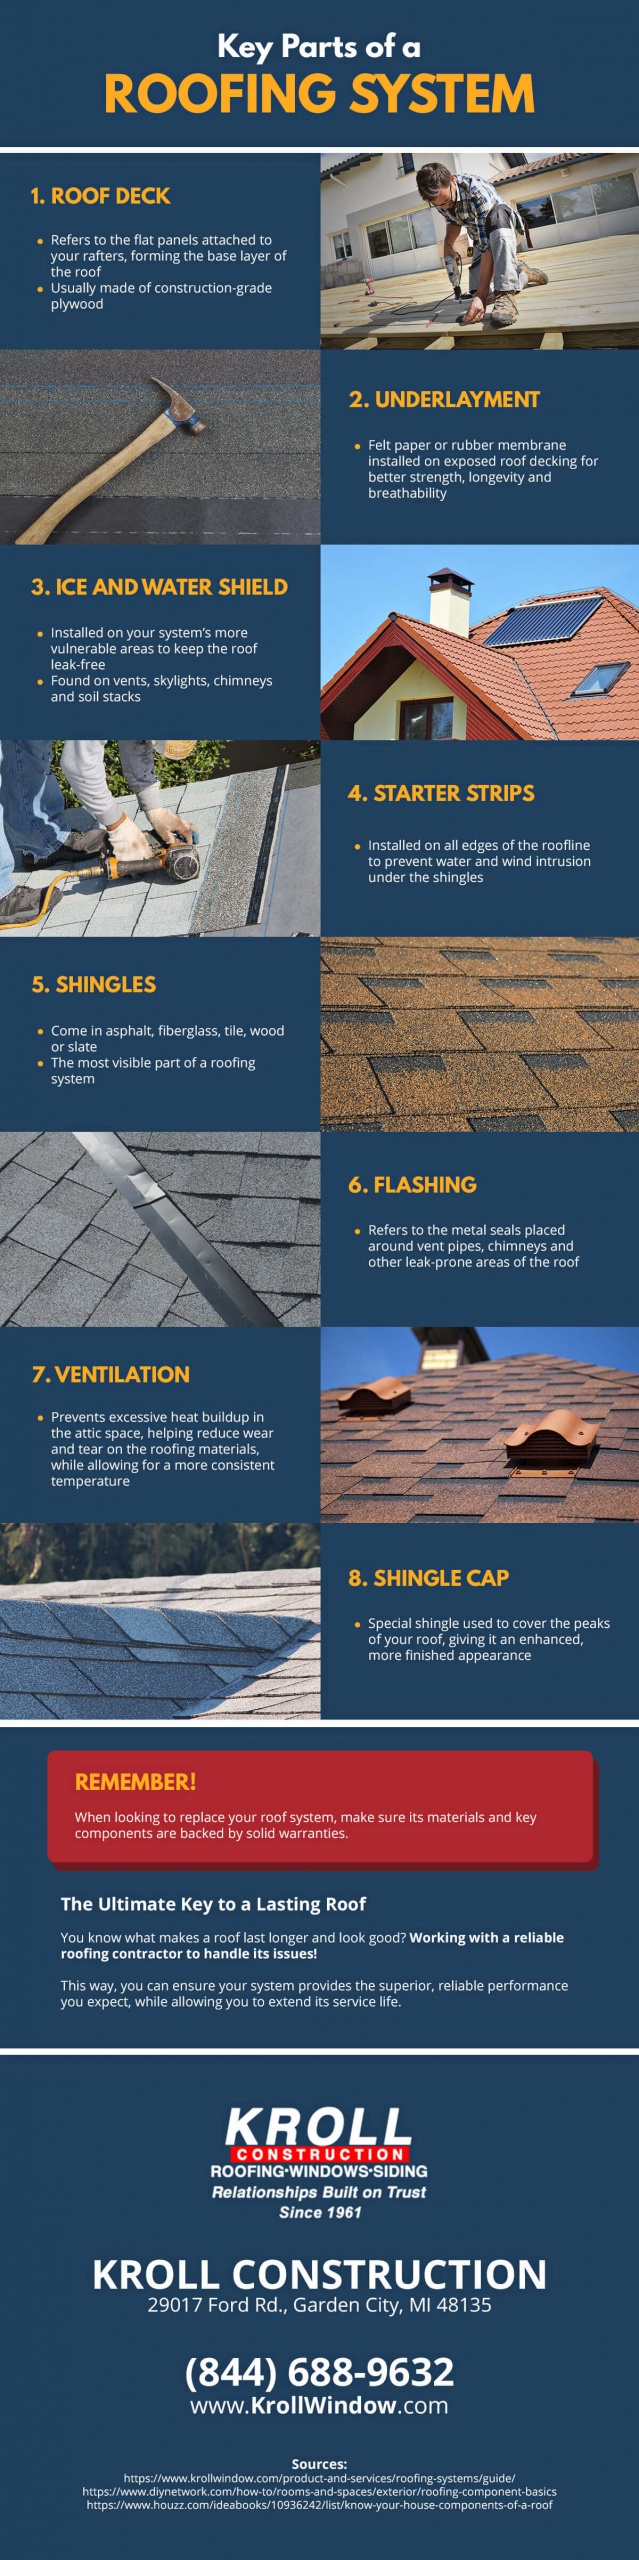 [INFOGRAPHIC] Key Parts of a Roofing System